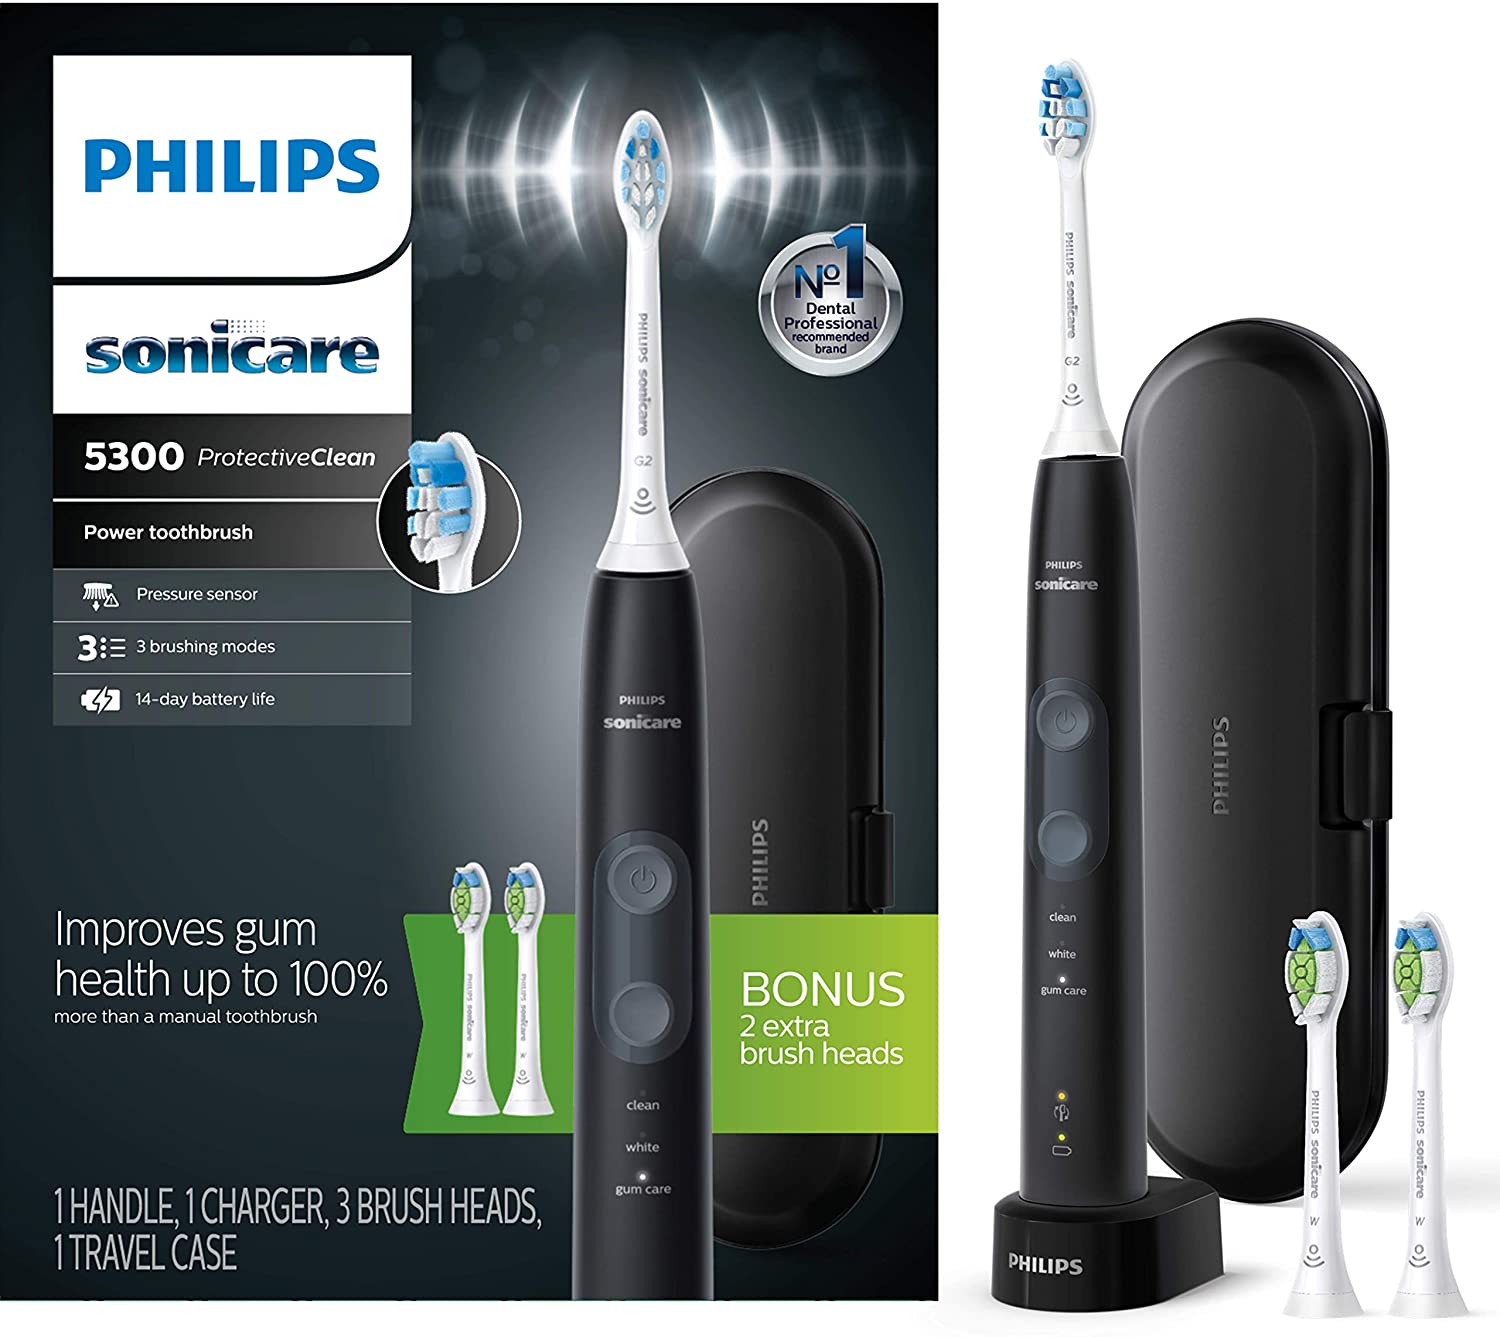 Philips Sonicare protective clean.